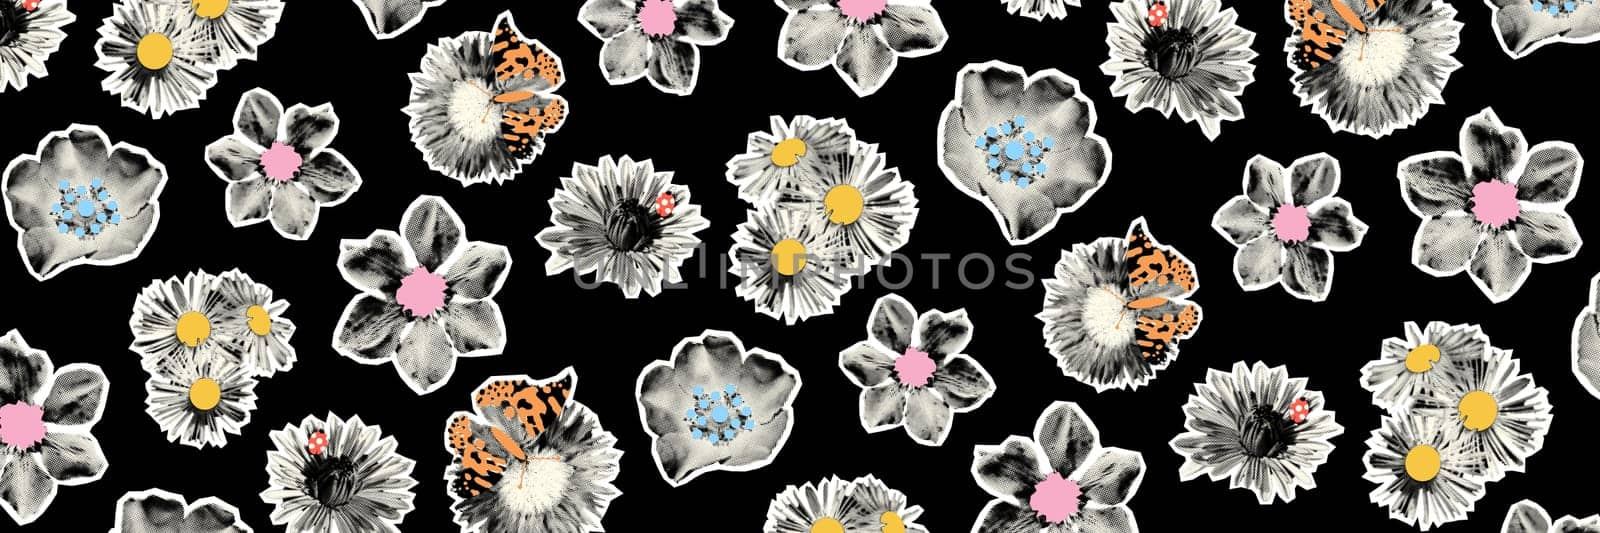 Wild flowers halftone collage banner template with doodle petals, butterfly. Grunge punk cut out shapes, dotted summer background. Trendy modern retro illustration isolated on black background